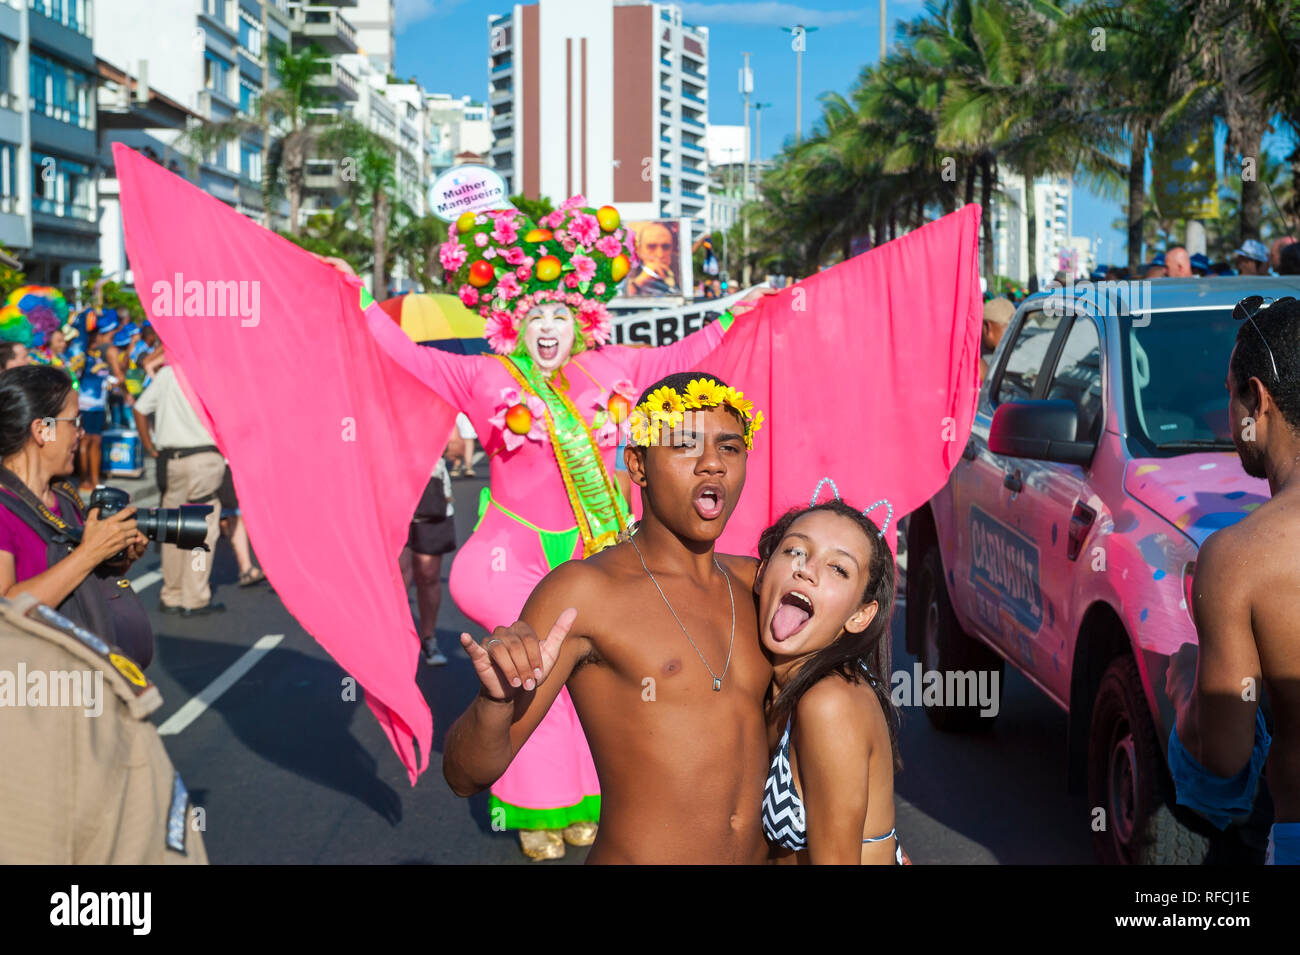 RIO DE JANEIRO - FEBRUARY 11, 2017: A Brazilian man in flamboyant pink costume photobombs a selfie of spectators at a Carnival street party in Ipanema Stock Photo